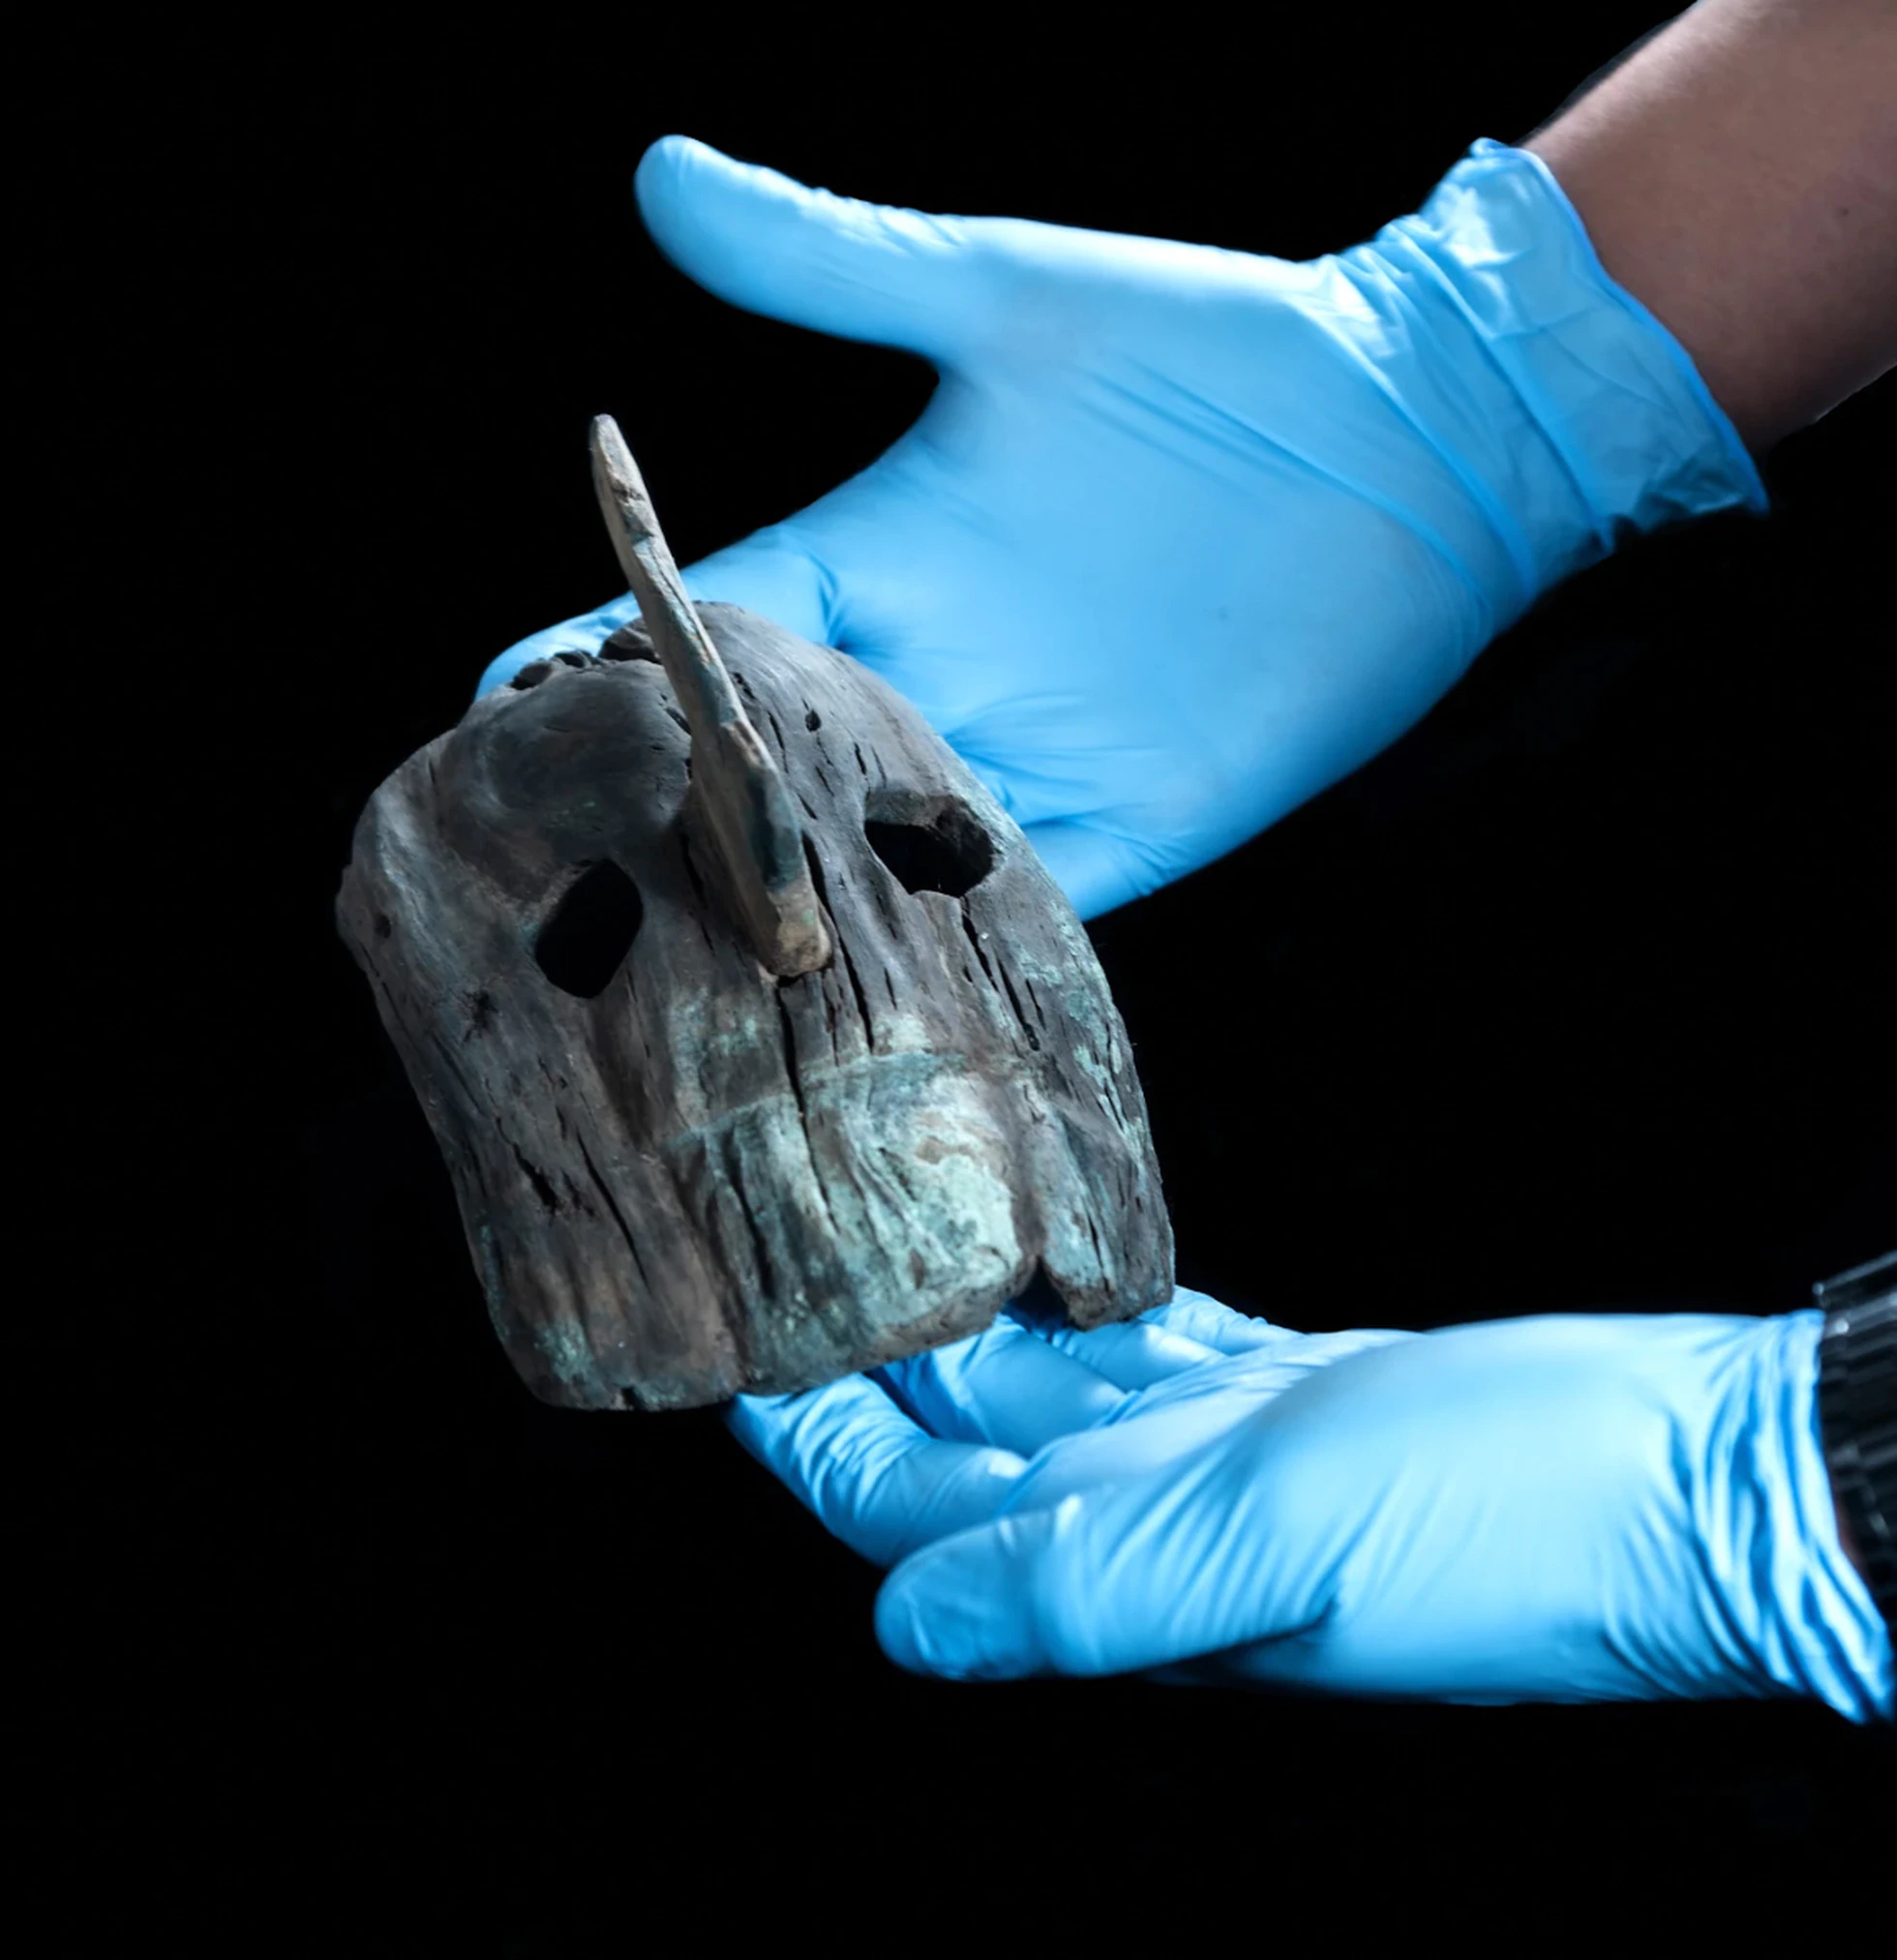 2,550 wood offerings found at Templo Mayor